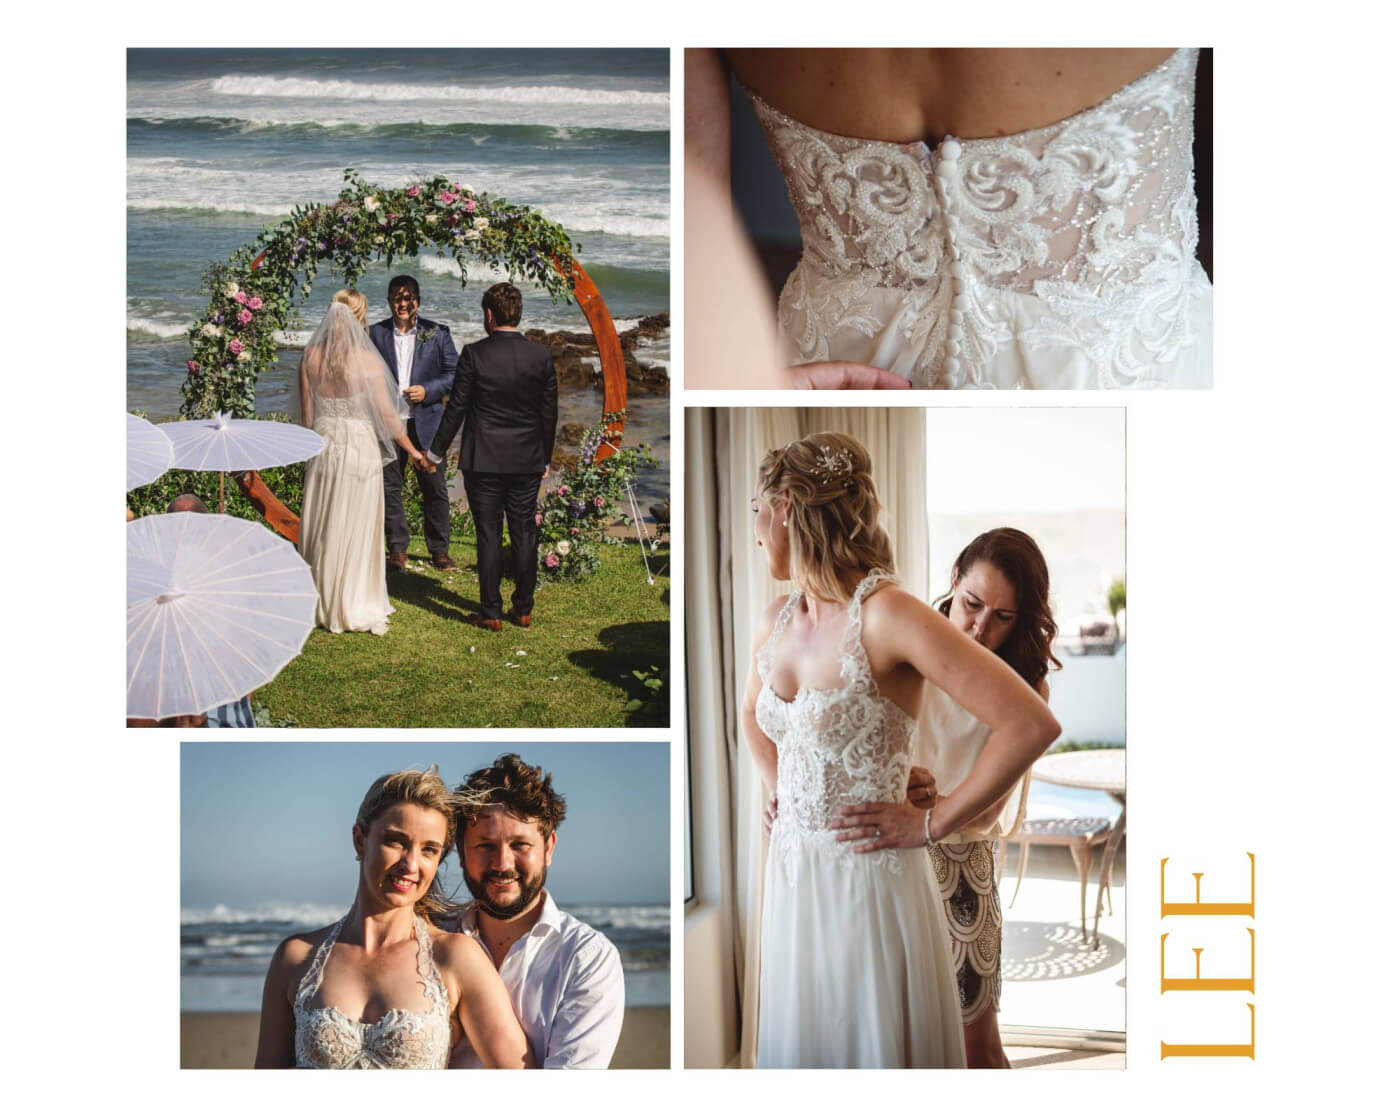 Lee's Wedding - Molteno Couture and Fabulous Flowers